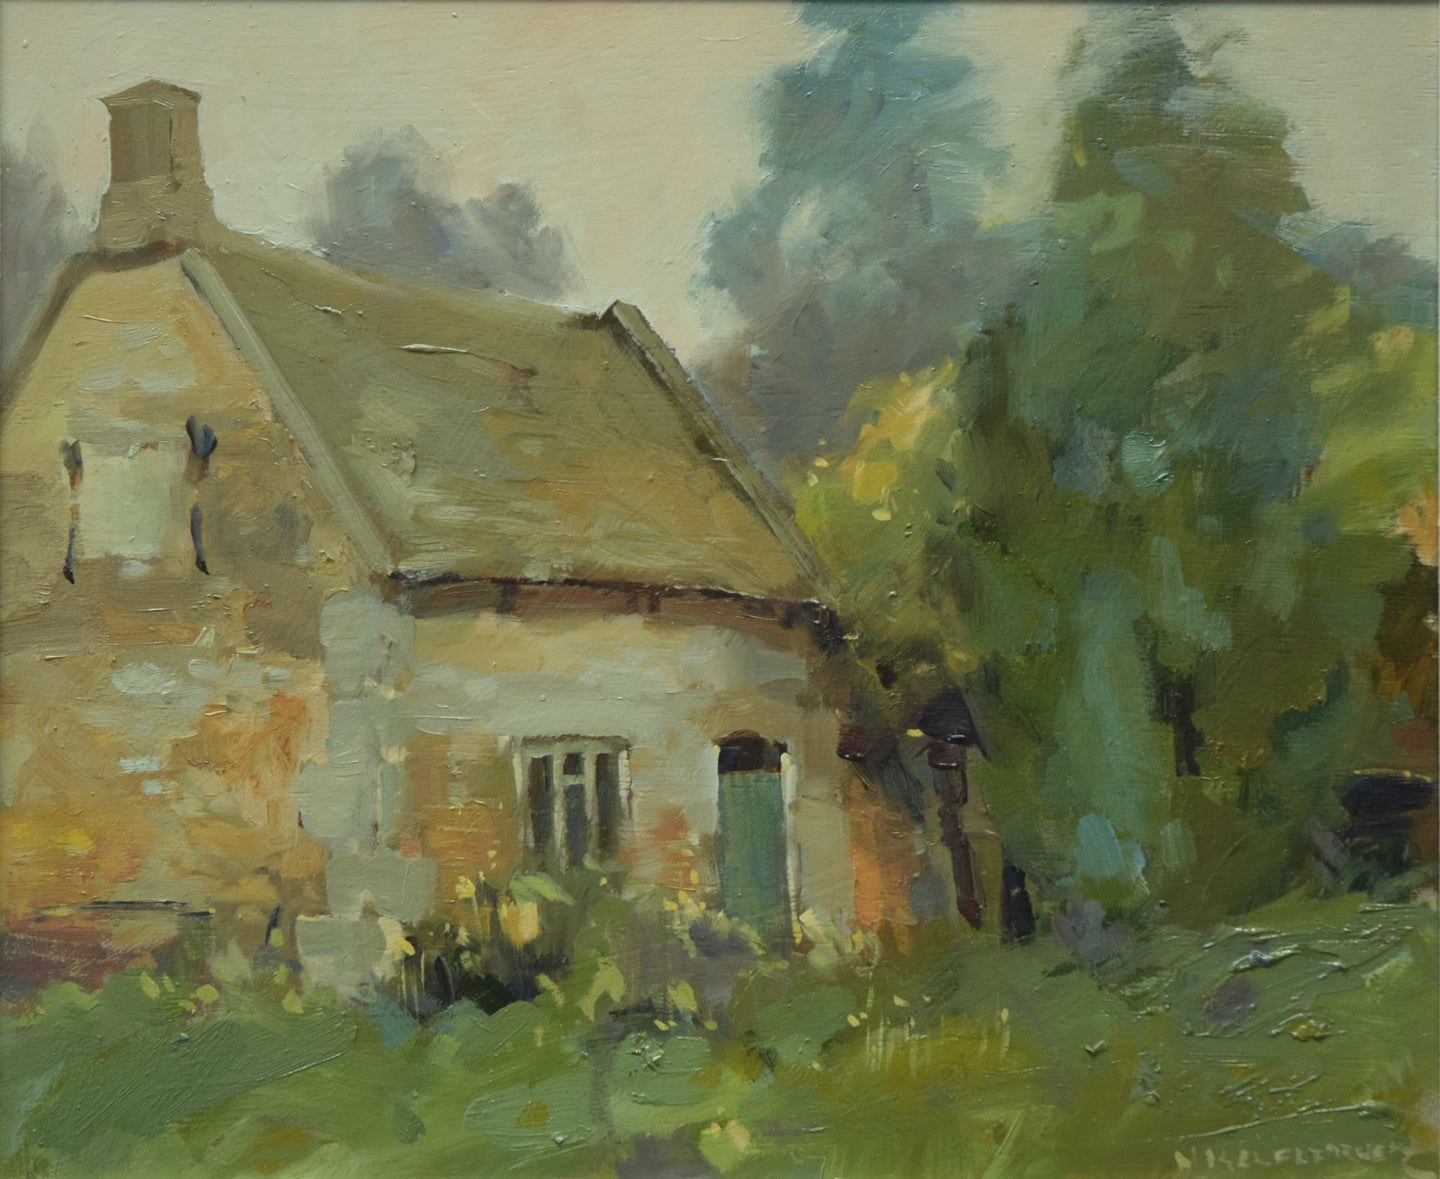 Oil painting of the old Bothy at Lyndon, painted in dull light, with beautifully subdued colours and tones, making the very best of the weather. The ancient stone of the cottage is painted in warm tones and the surrounding trees on the right and behind painted in receding tones of green and blue.